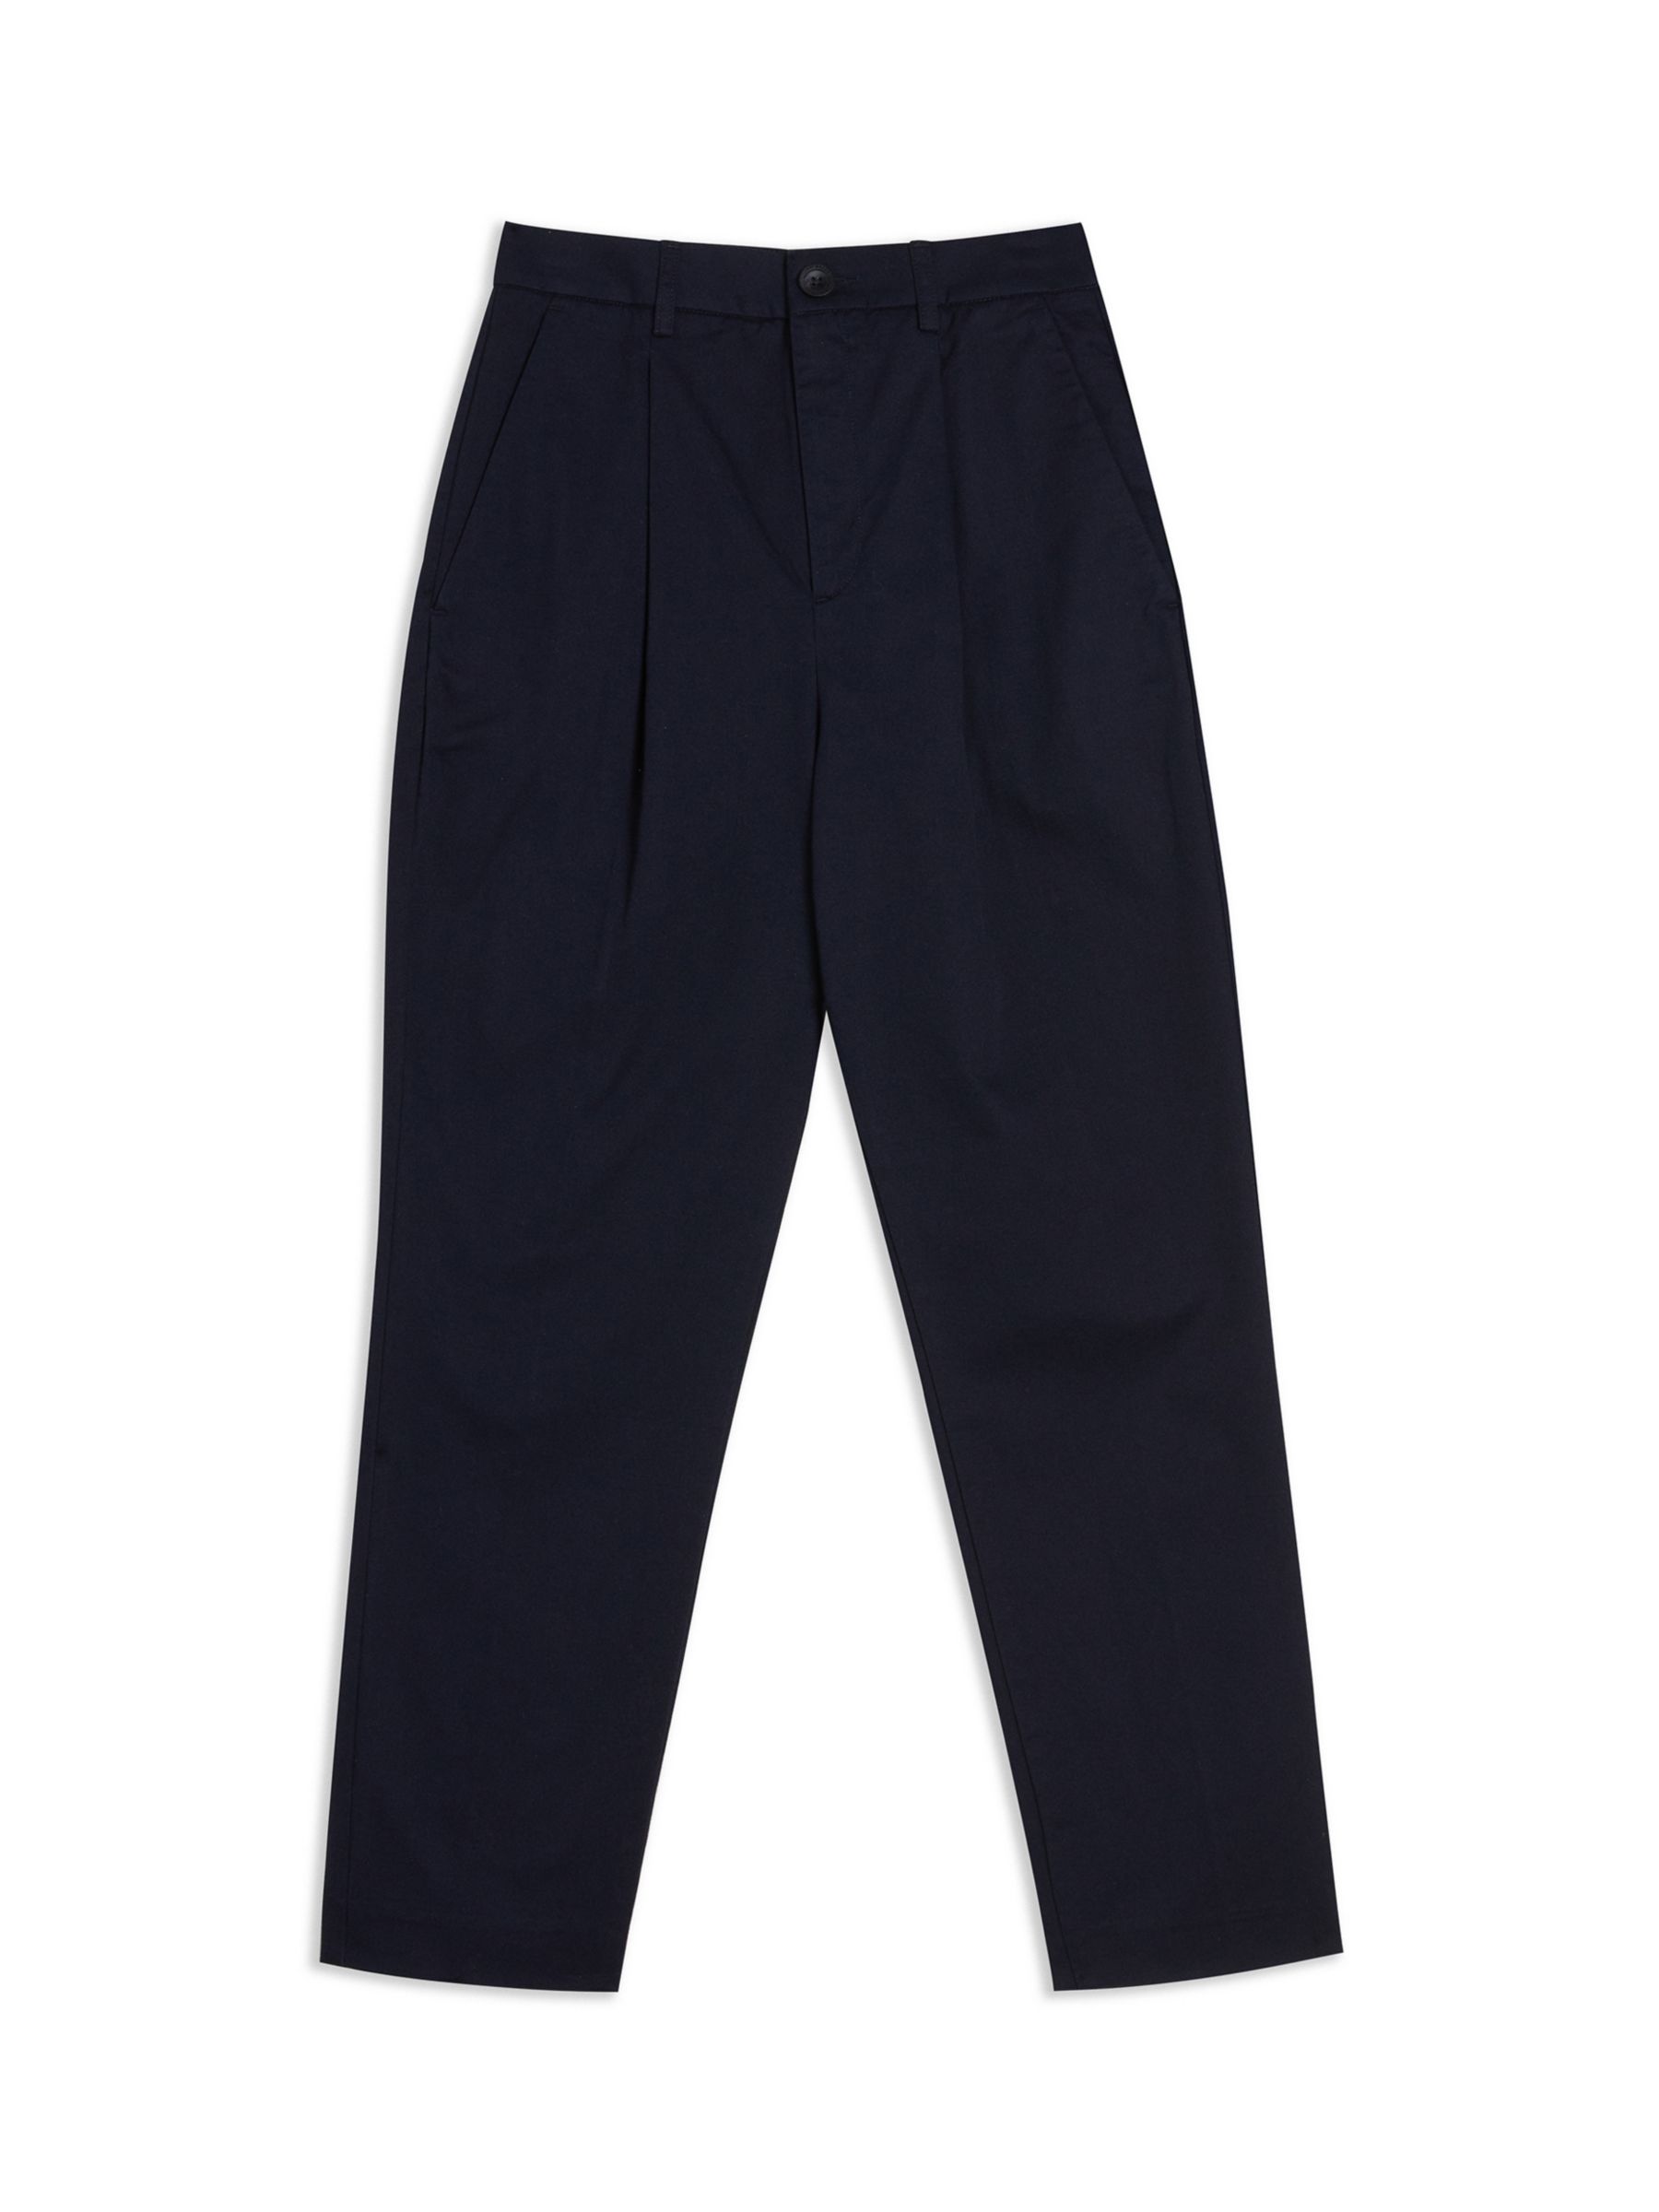 Ted Baker Maryiah High Waisted Trousers, Dark Blue at John Lewis & Partners